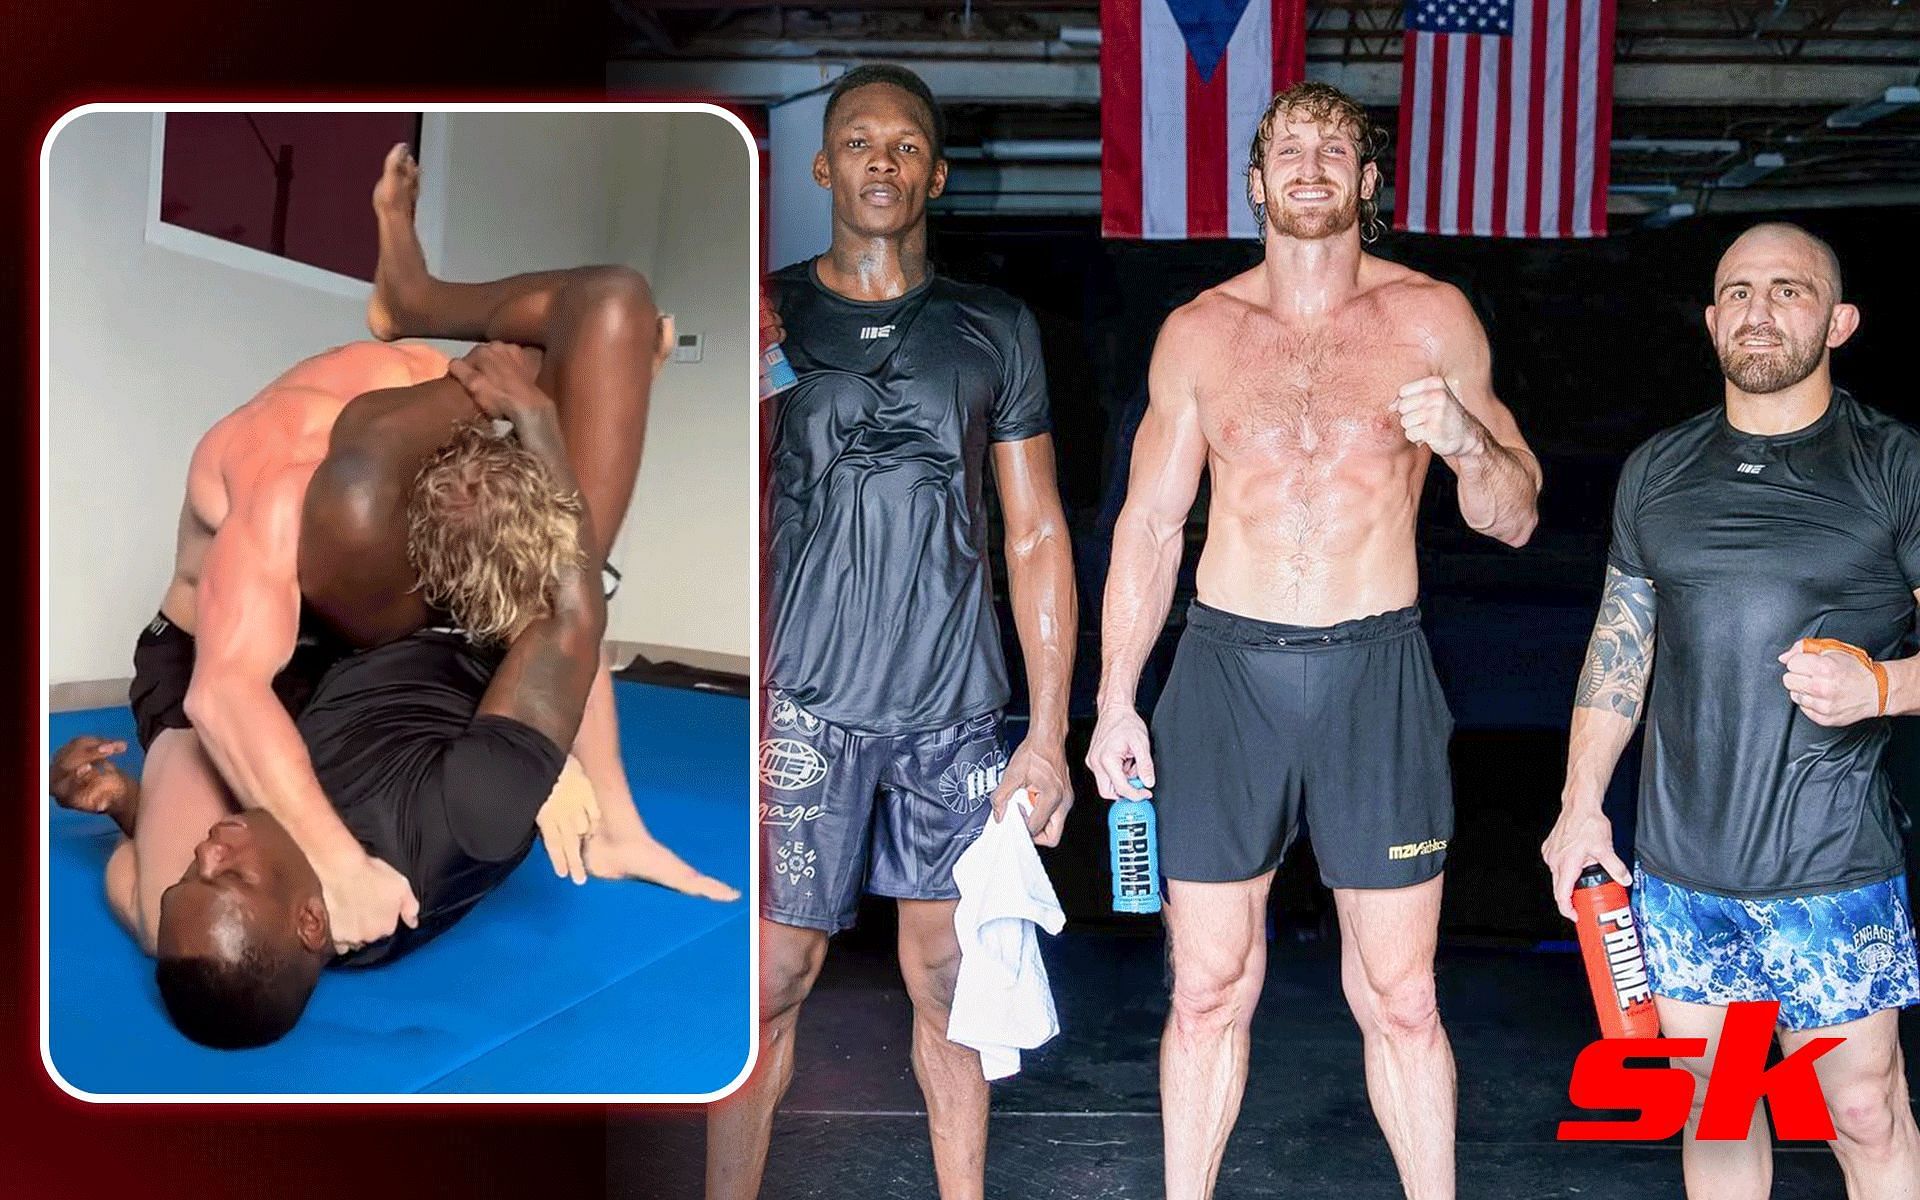 A picture from when Israel Adesanya (left) Logan Paul (middle) Alexander Volkanovski (right) engaged in a grappling session in Puerto Rico [Images courtesy @loganpaul on Instagram]